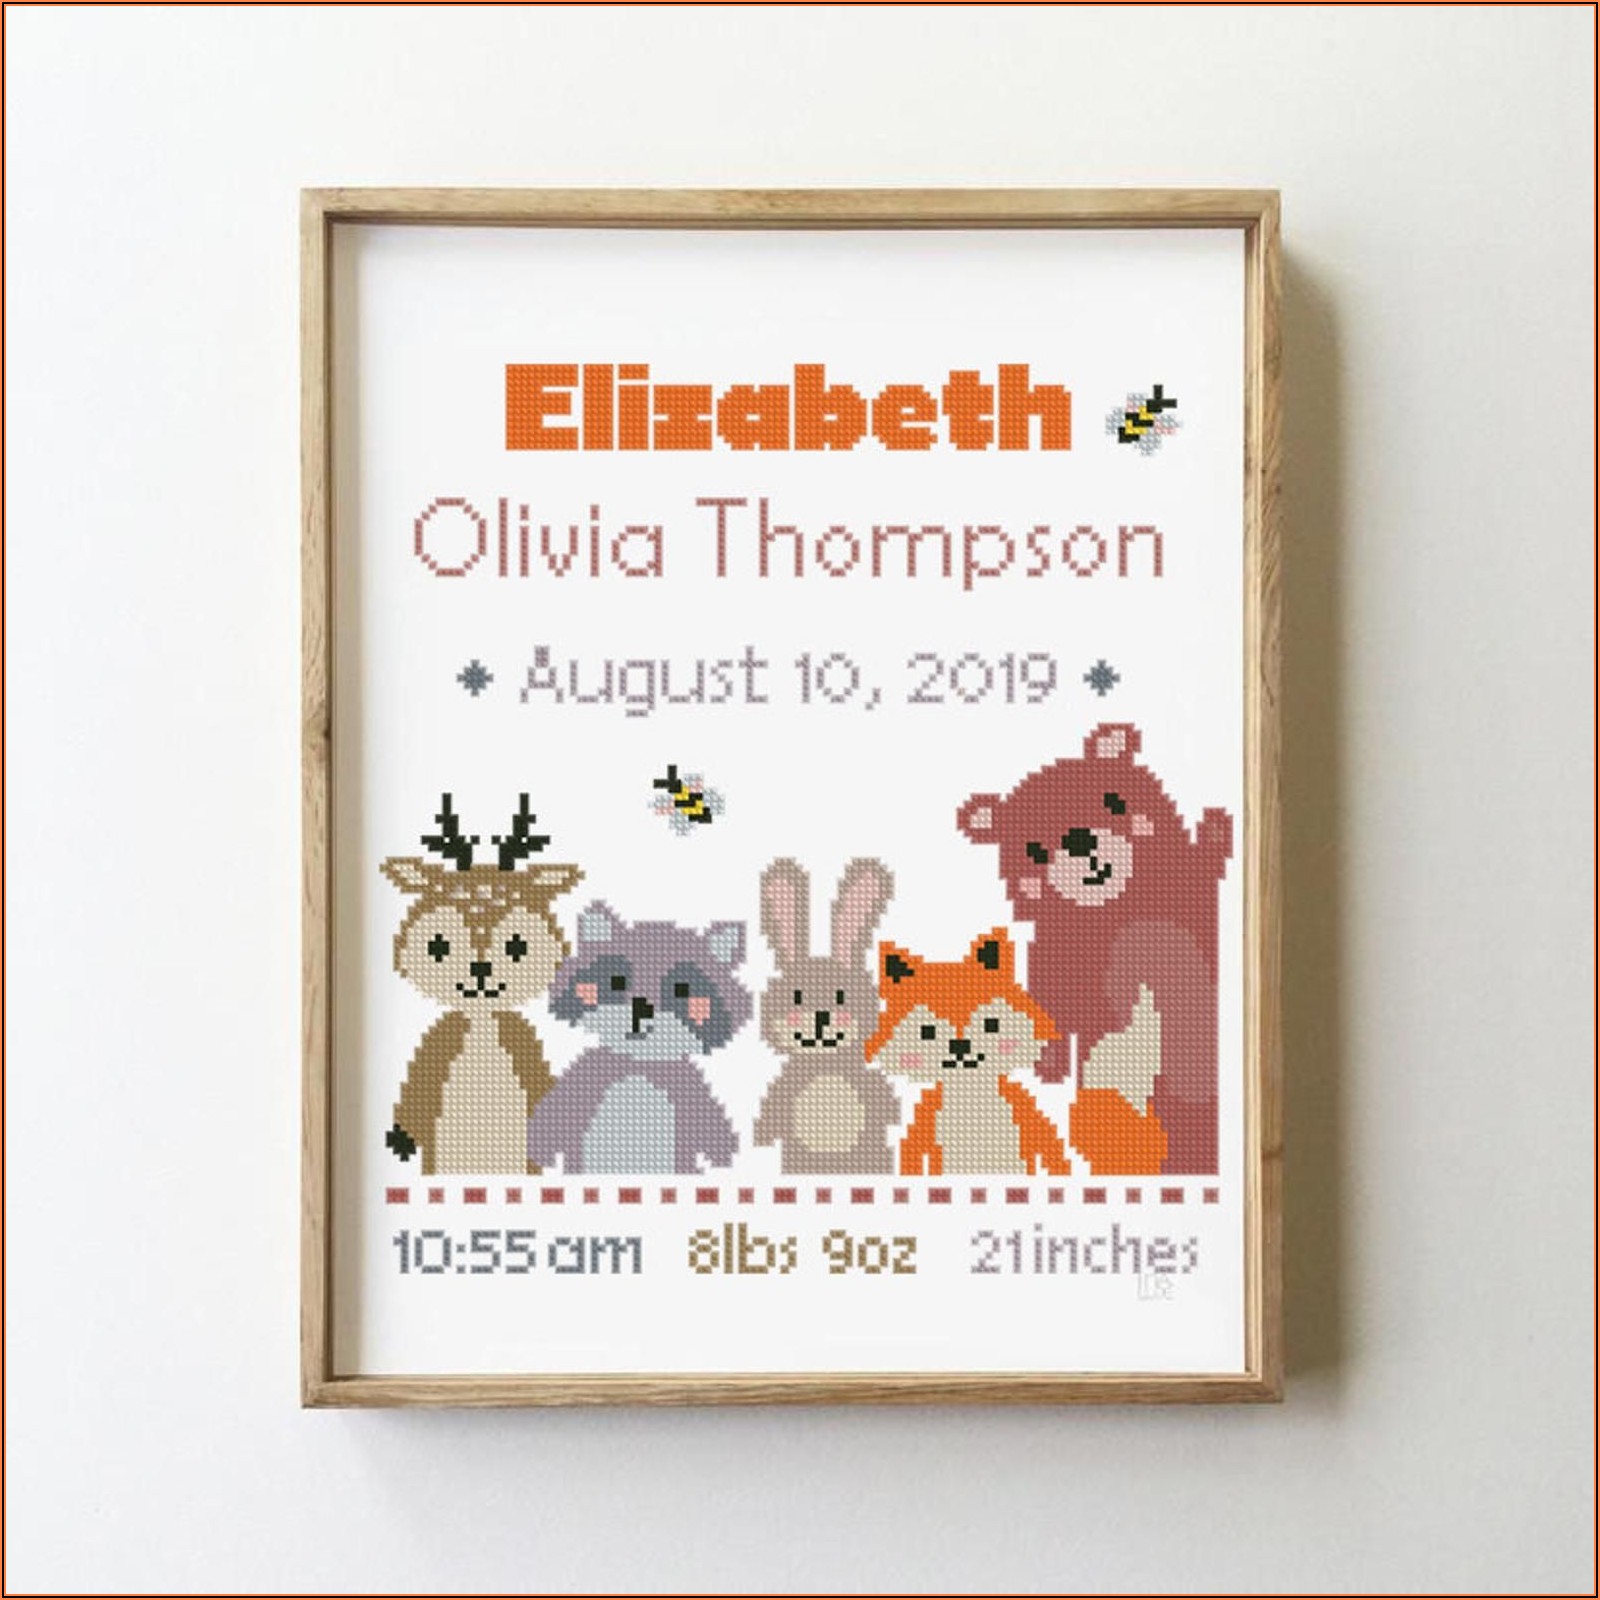 Free Counted Cross Stitch Birth Announcement Patterns